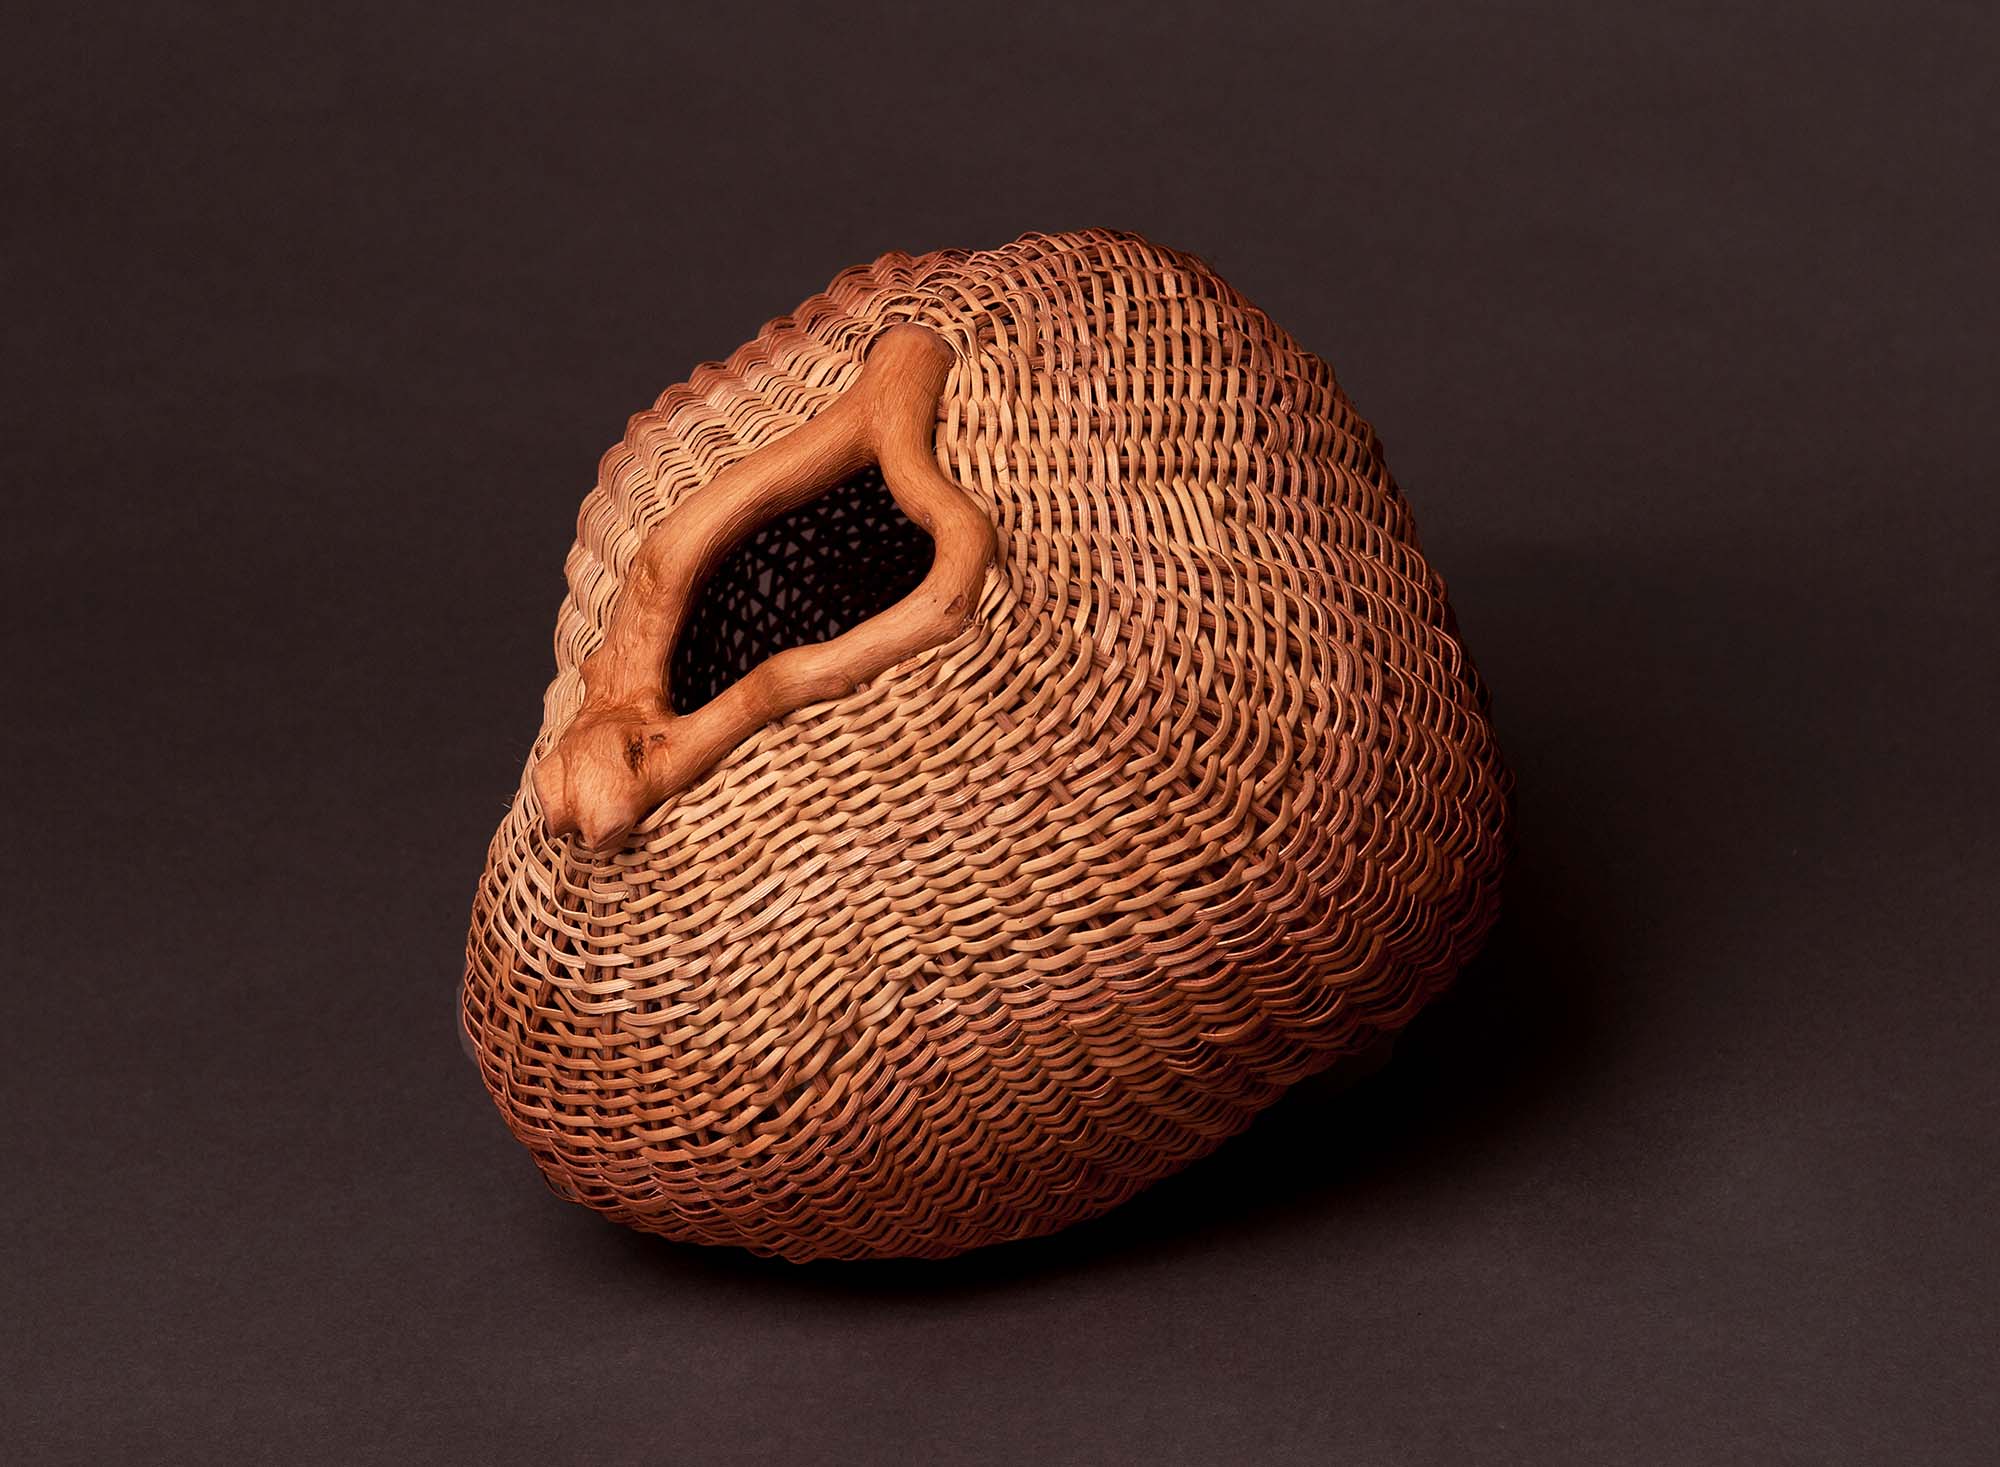 An organically shaped woven basket on a dark background